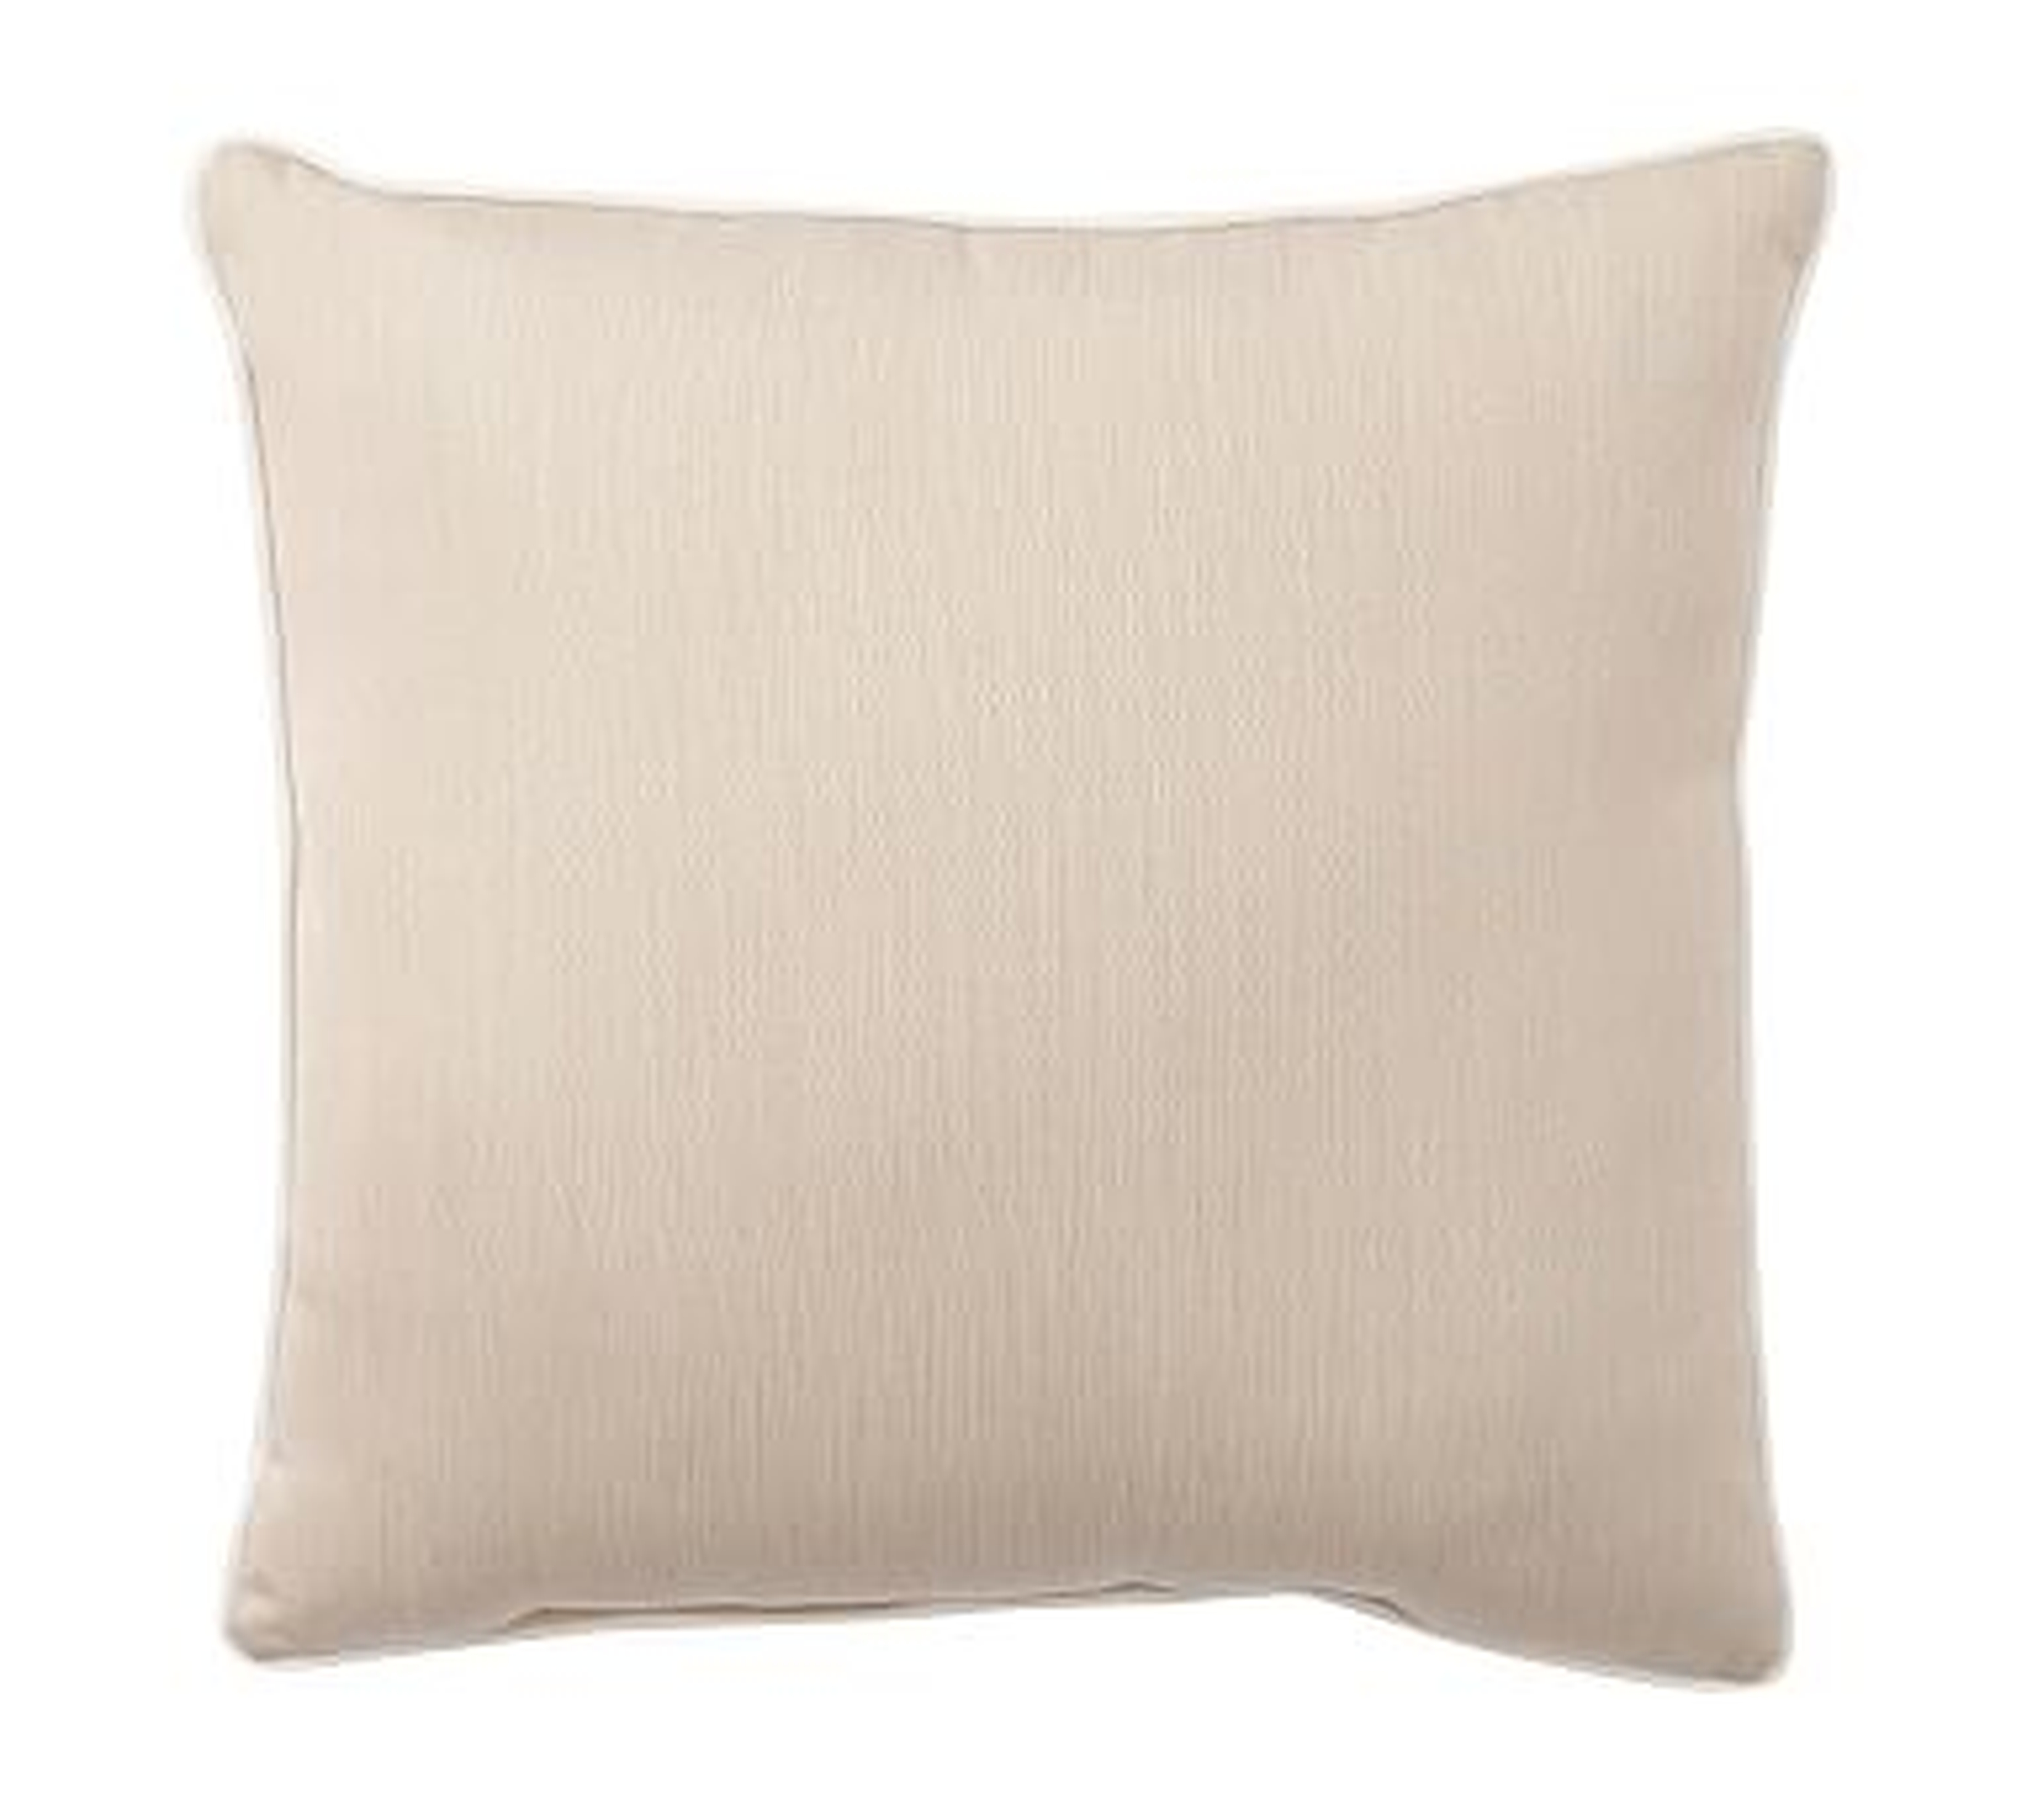 Sunbrella(R), Contrast Piped Solid Outdoor Pillow, 18", Linen Sand - Pottery Barn